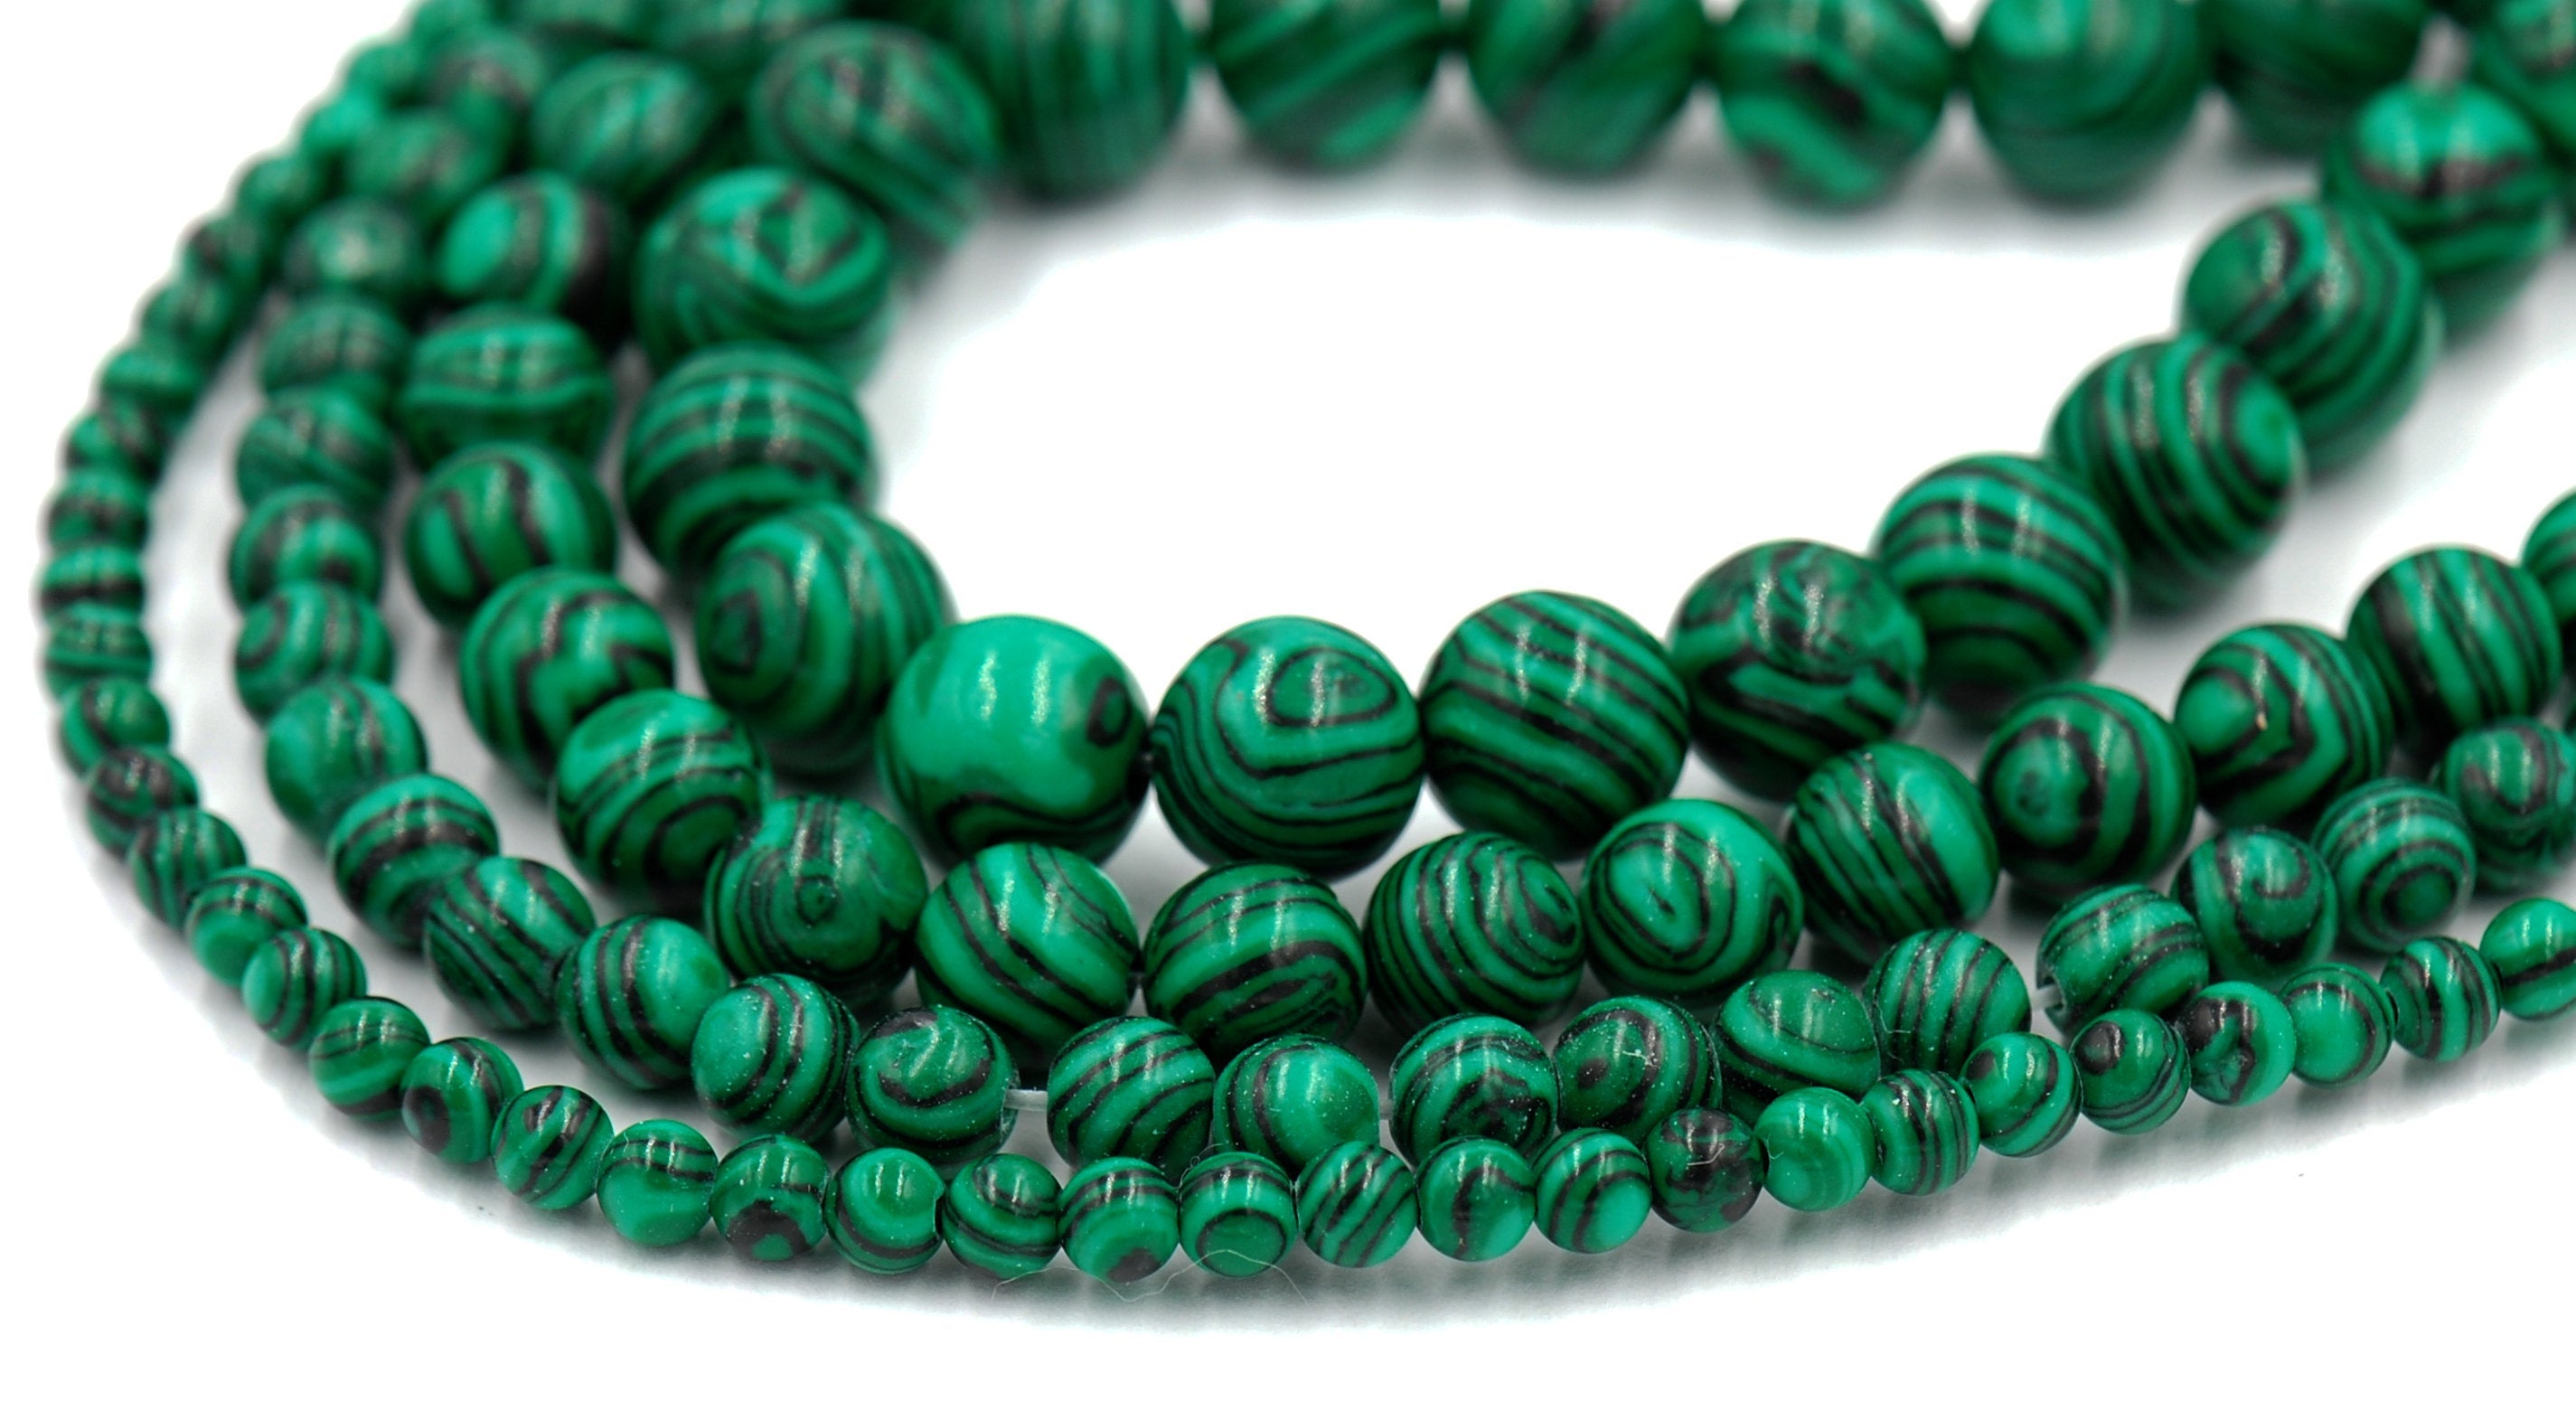 Synthetic Malachite Beads Strands, Dyed, Round, green, 4mm, 6mm,8mm,10mm -full strand